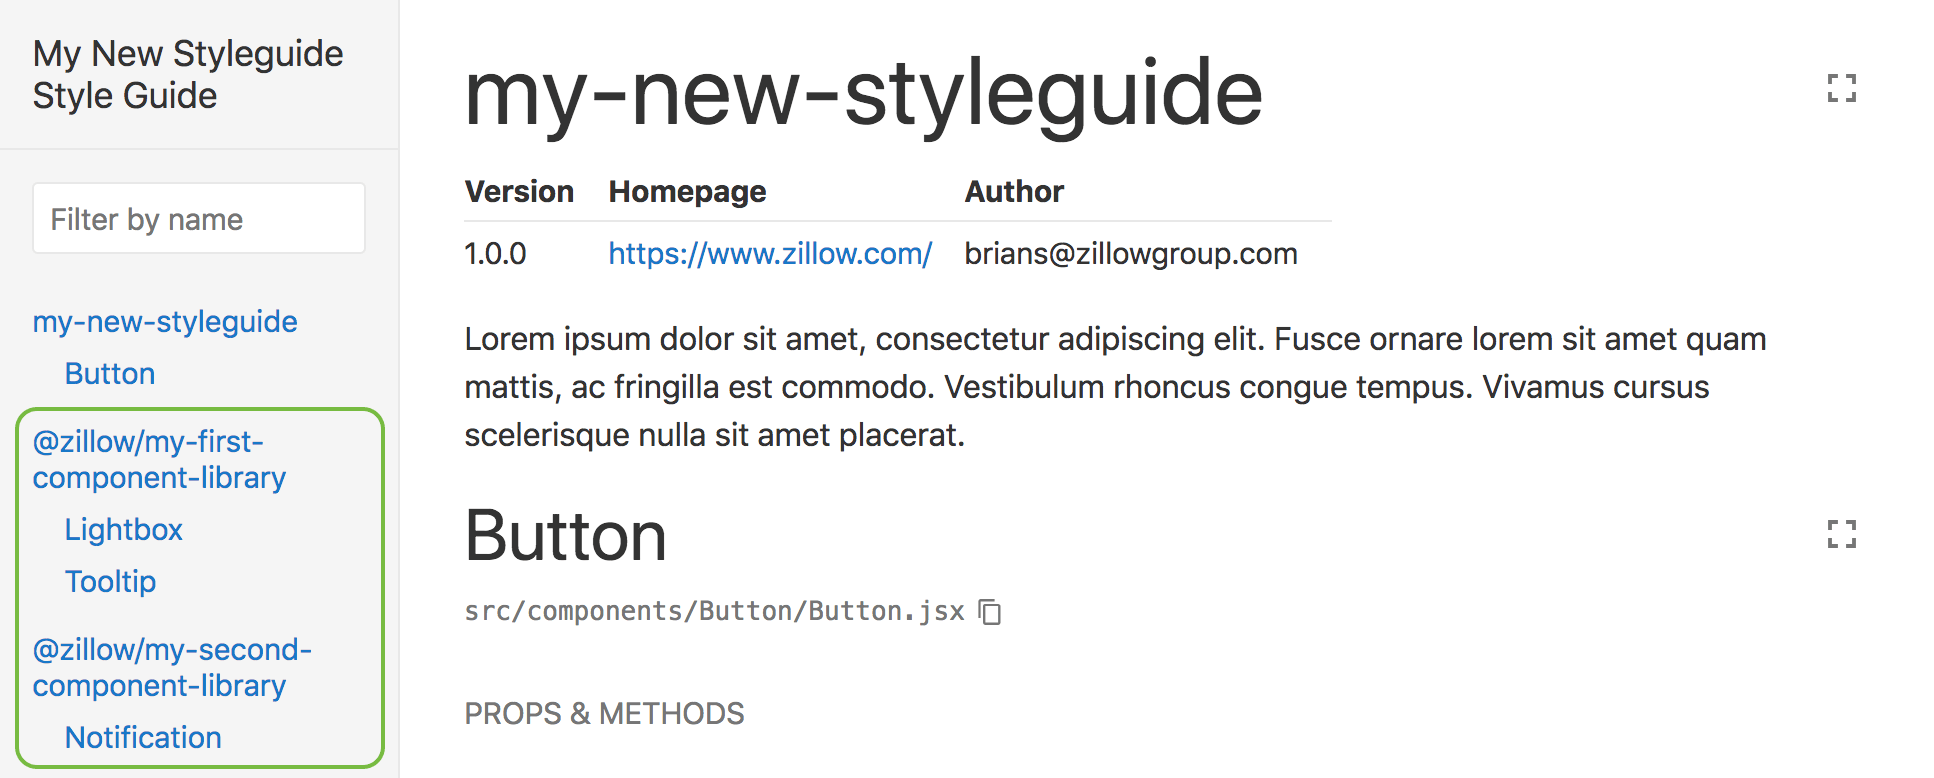 Linked style guide